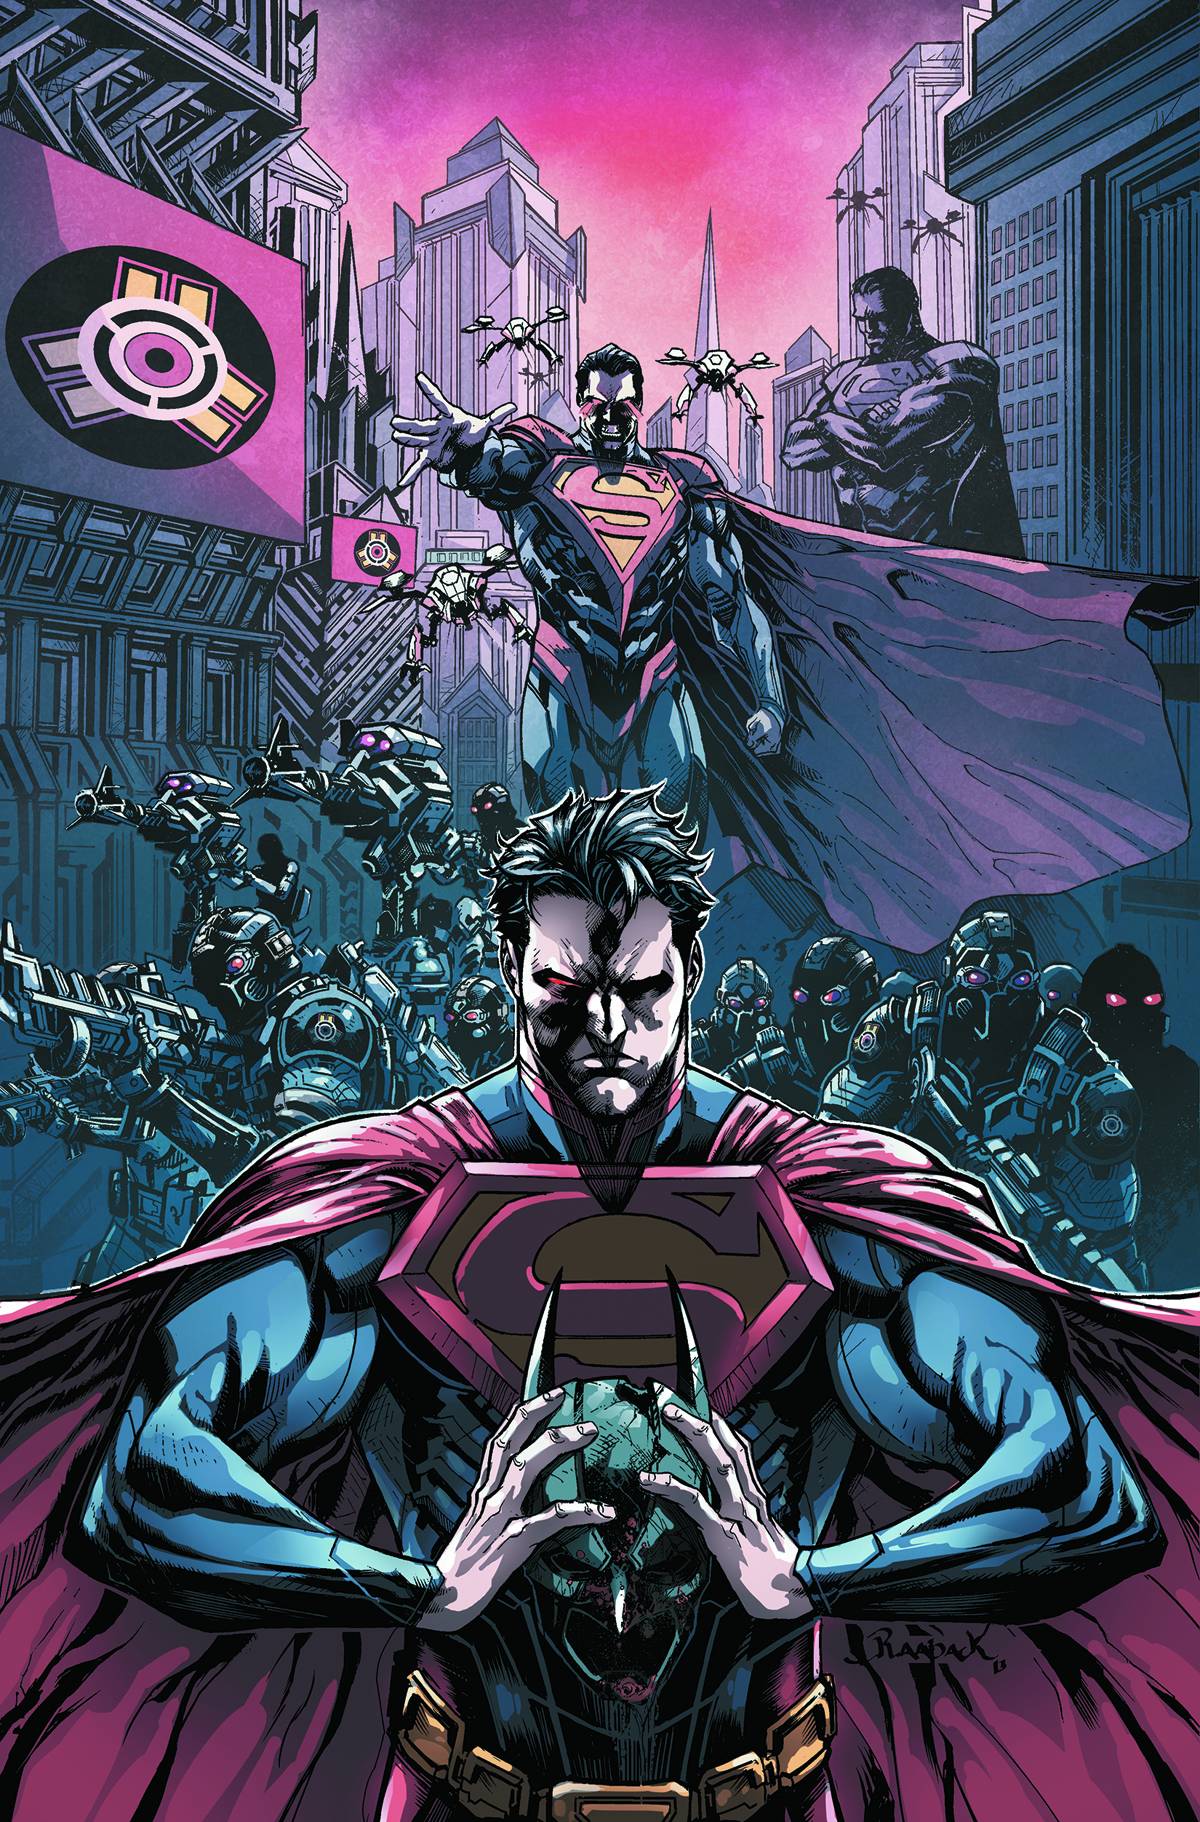 INJUSTICE YEAR TWO #1 - Tom Taylor